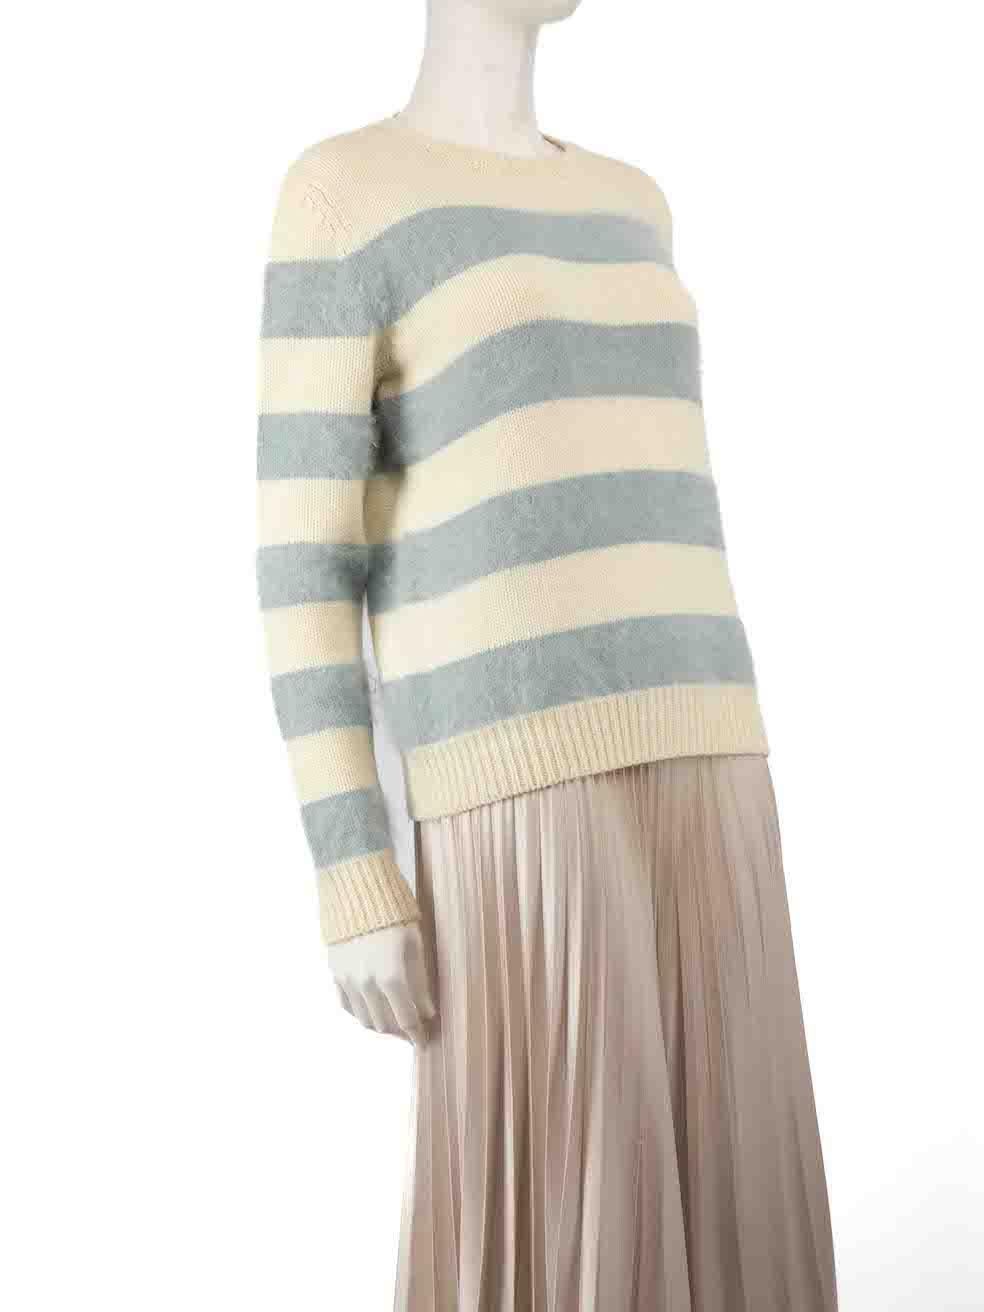 CONDITION is Very good. Minimal wear to jumper is evident. There is a small mark on the left side sleeve and sleeve hem on this used Gucci designer resale item.
 
 
 
 Details
 
 
 Multicolour- beige and blue
 
 Wool
 
 Knit jumper
 
 Striped